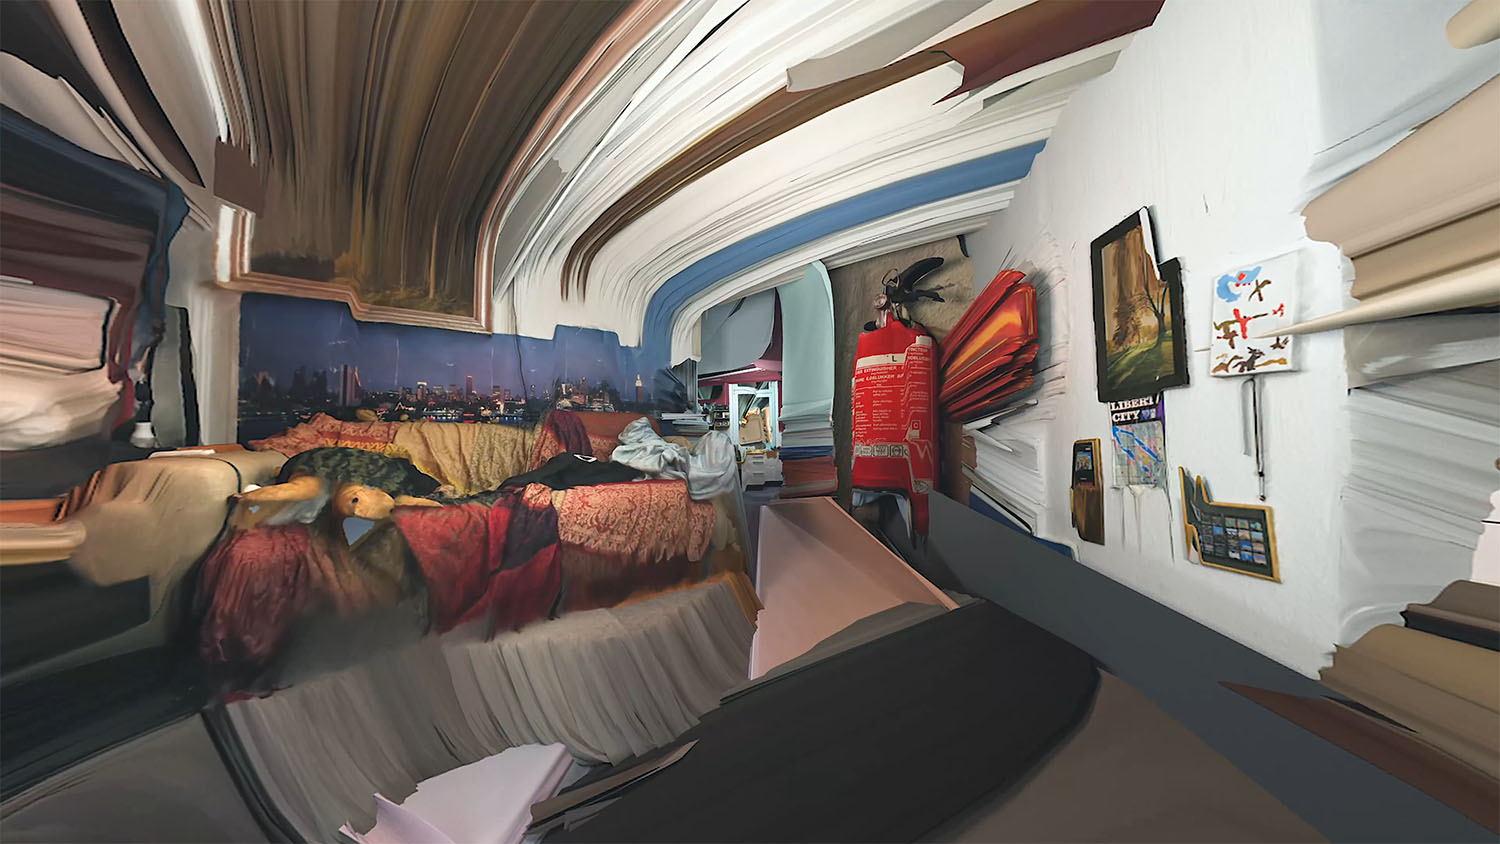 A colorful room containing a sofa and fire extinguisher is digitally distorted.